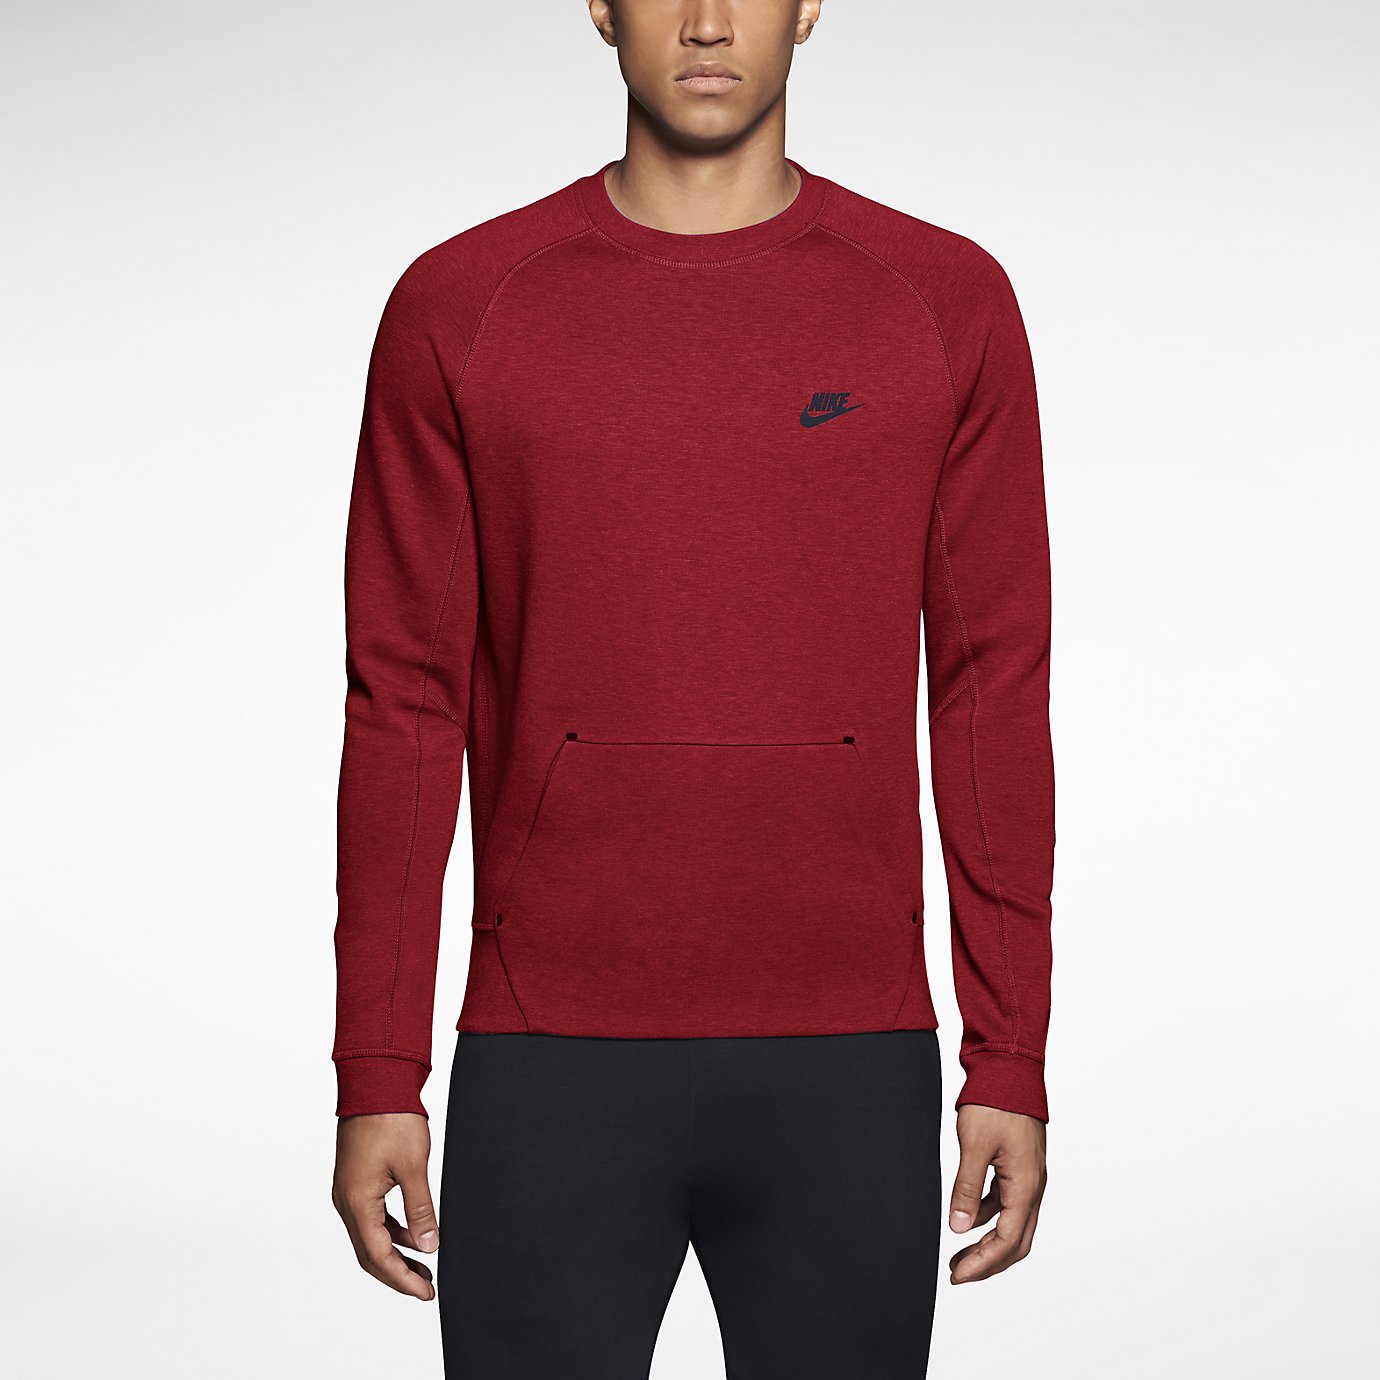 Buy > red nike tech fit > in stock